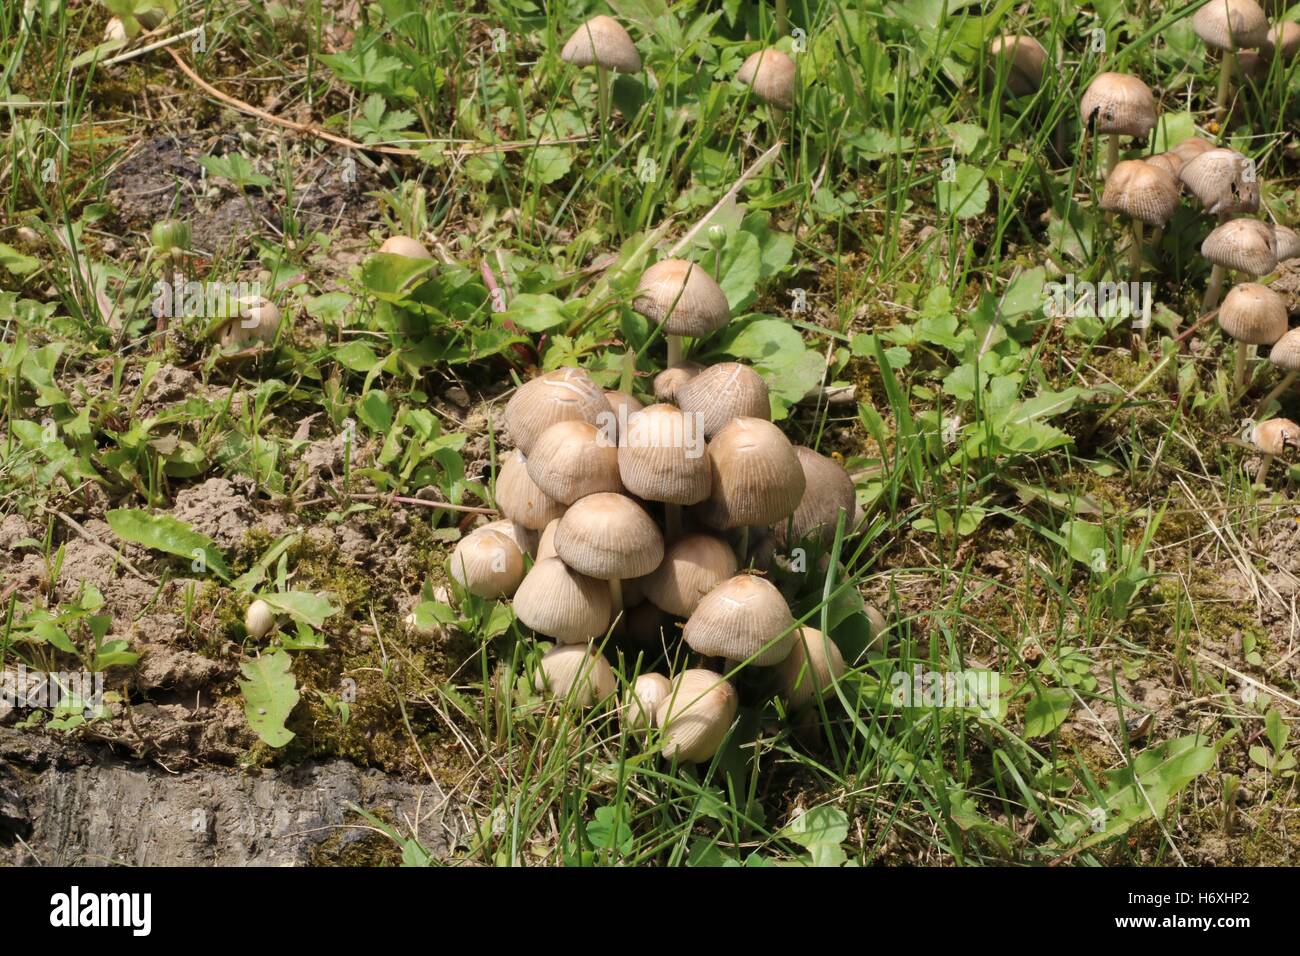 Forest mushrooms in the grass available in high-resolution and several sizes to fit the needs of your project Stock Photo